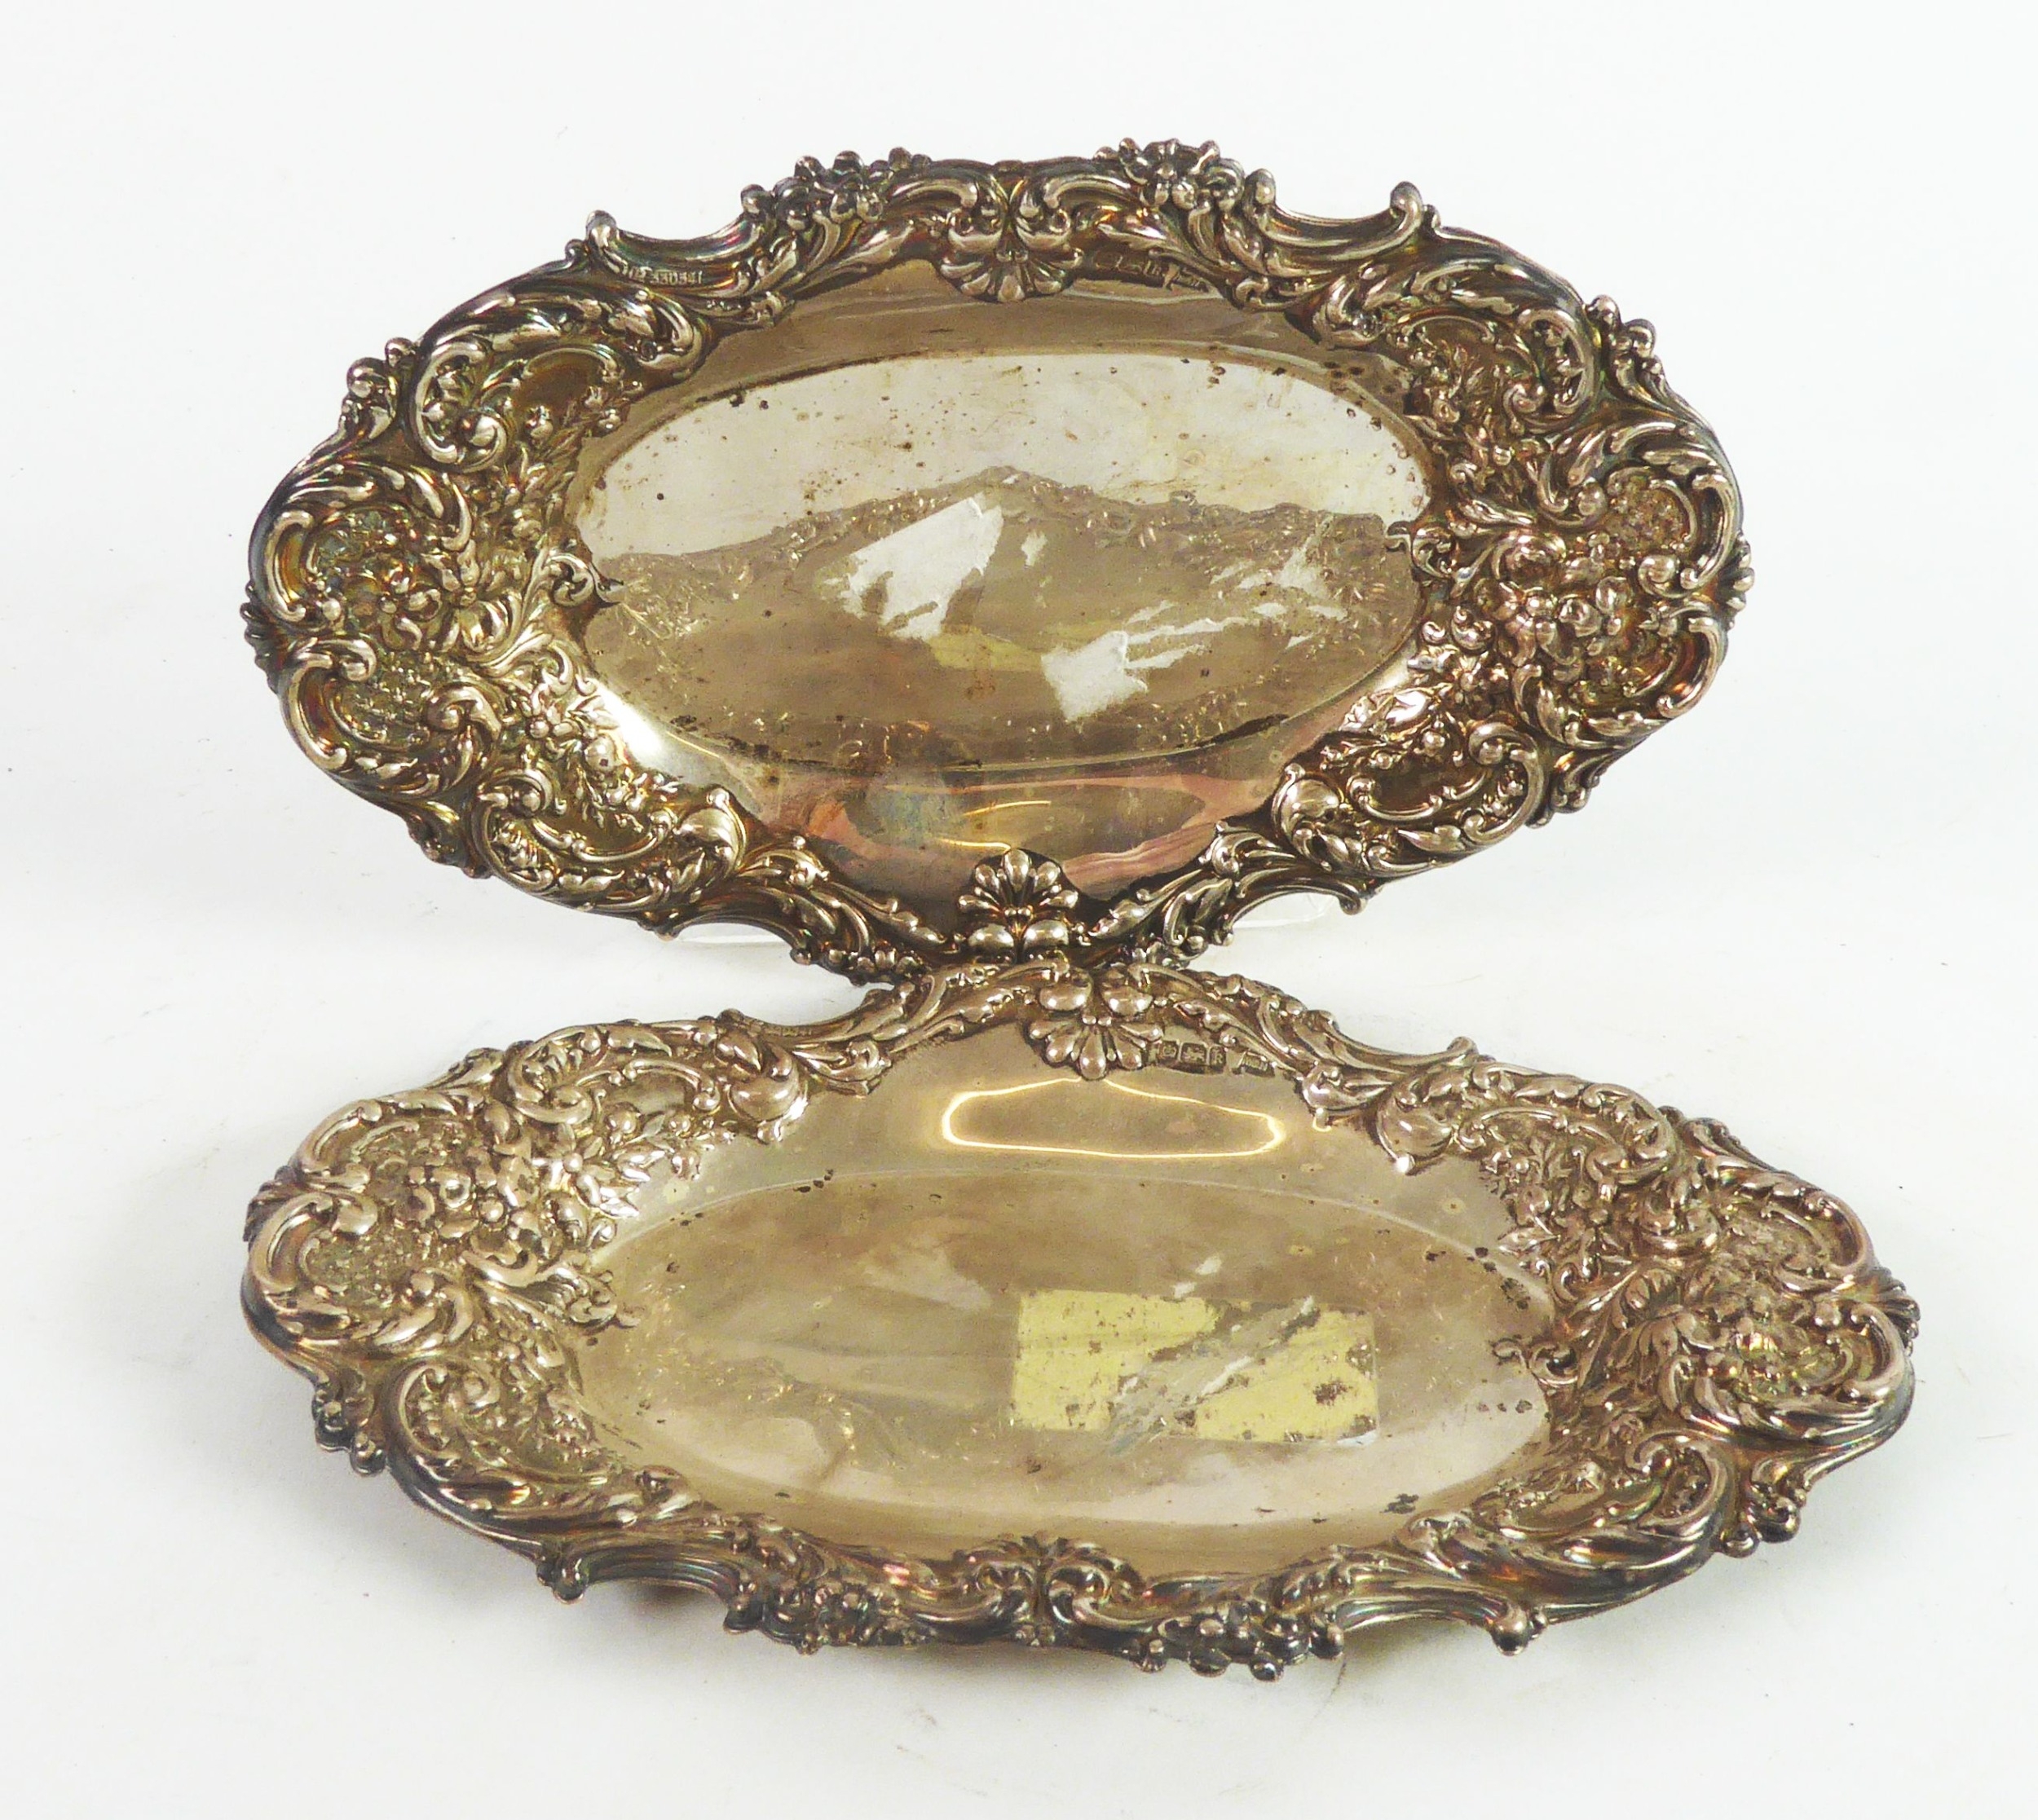 EDWARD VII PAIR OF EMBOSSED SILVER SMALL TRAYS OR STANDS BY WALKER & HALL, each of oval form with